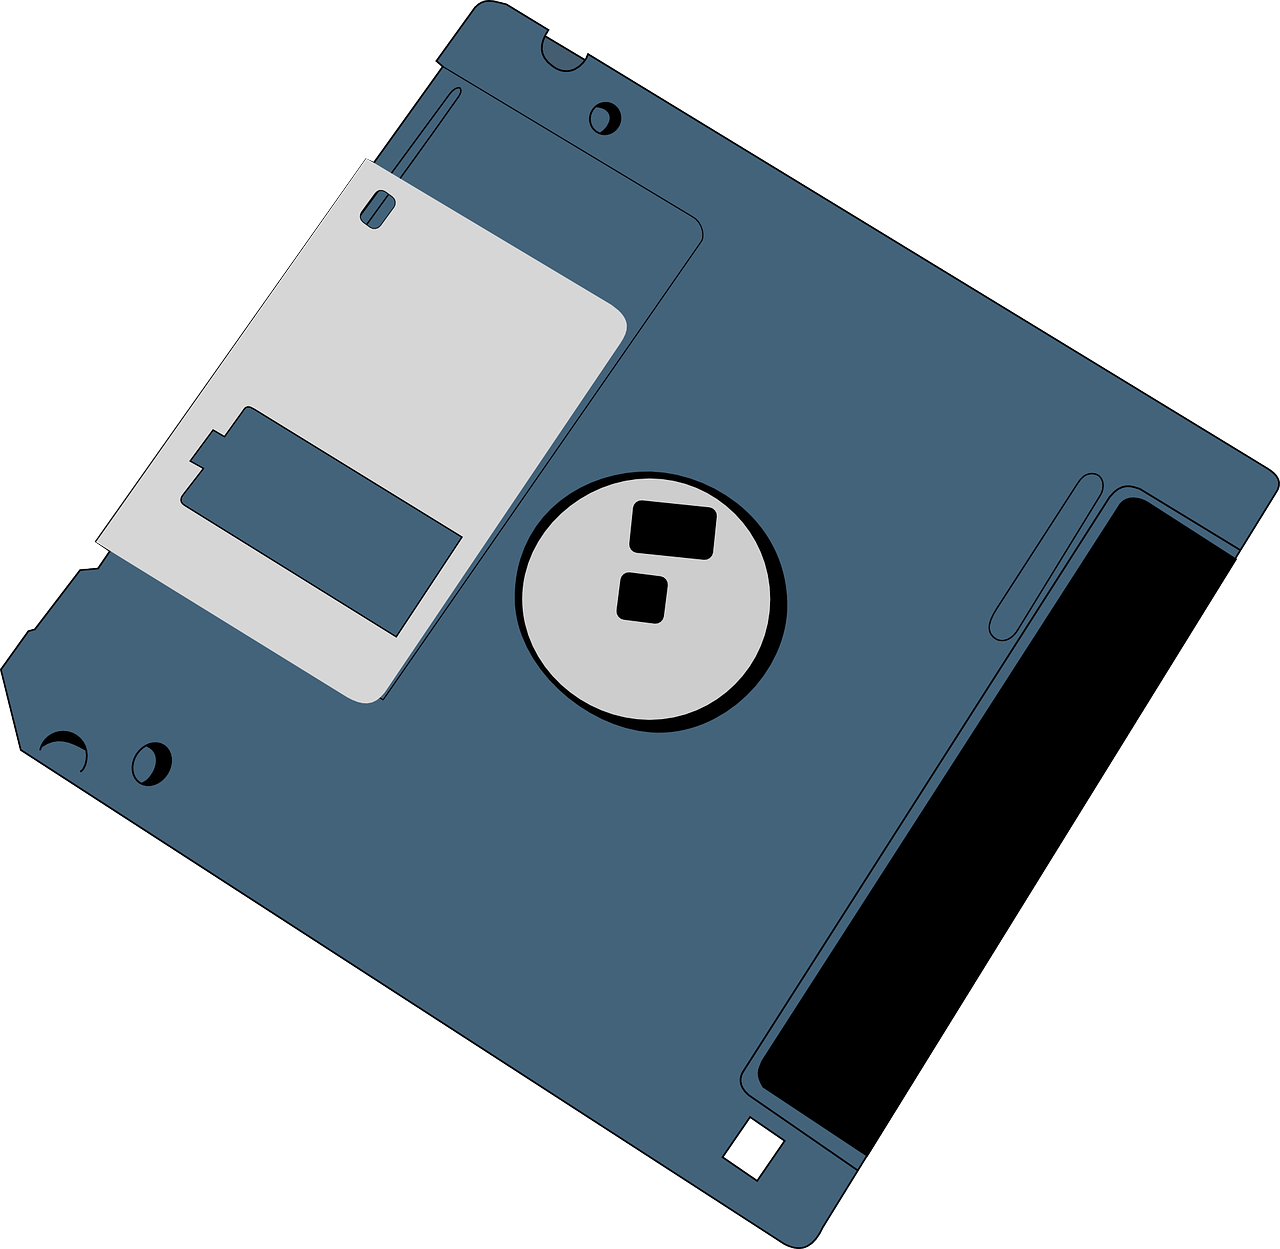 disk-160525_1280.png